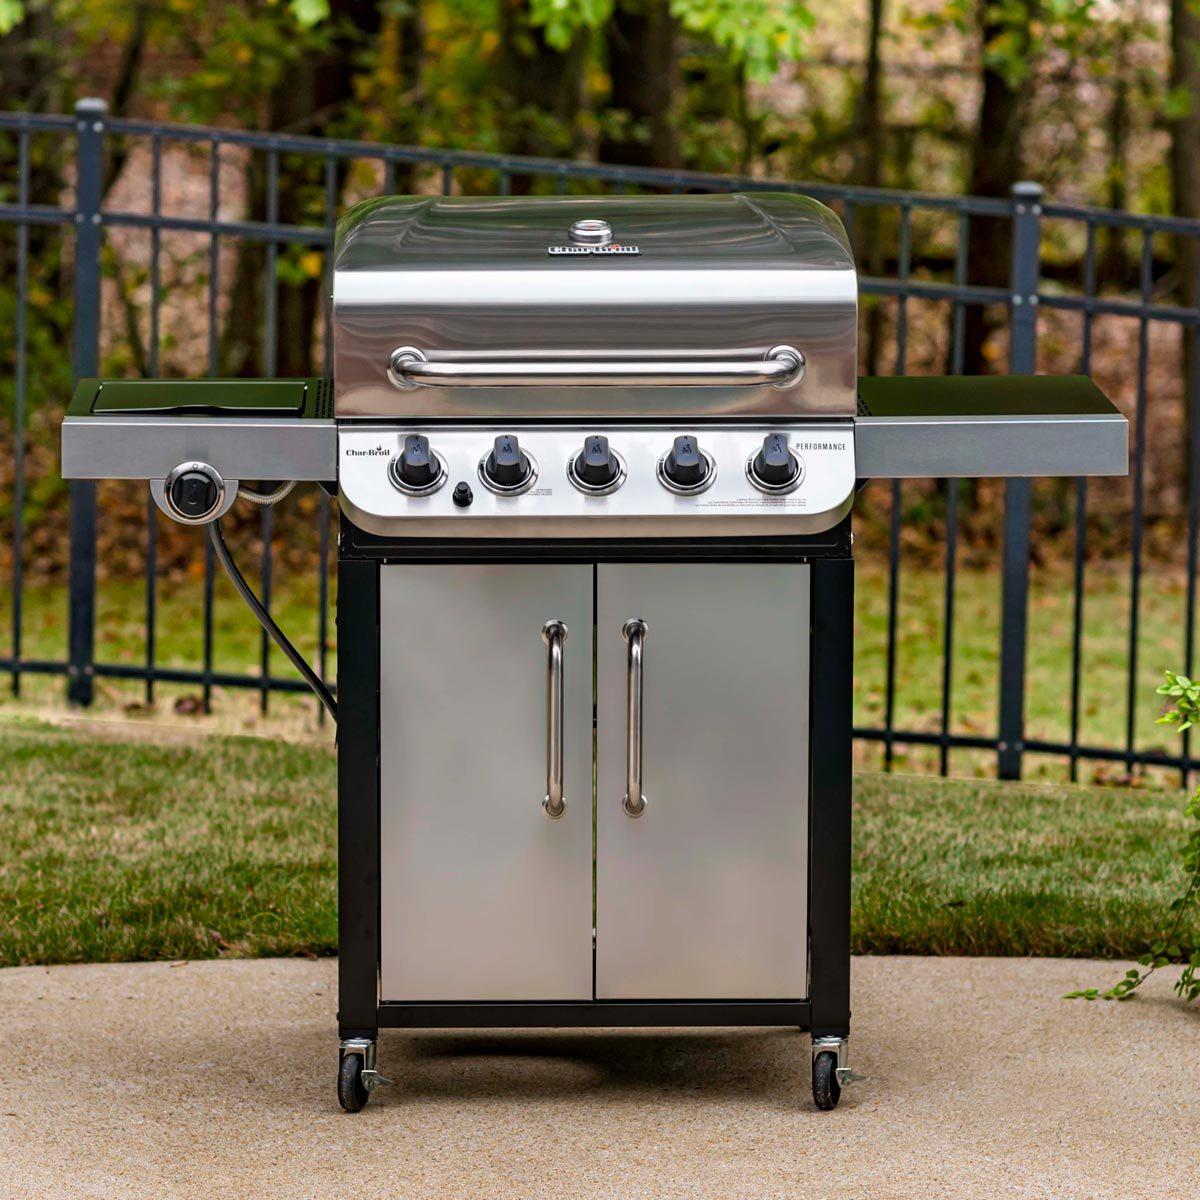 https://www.tasteofhome.com/wp-content/uploads/2023/04/The-Best-Gas-Grill-to-Buy-in-2023-According-to-Our-Test-Kitchen_FT_via-wayfair.com_-1.jpg